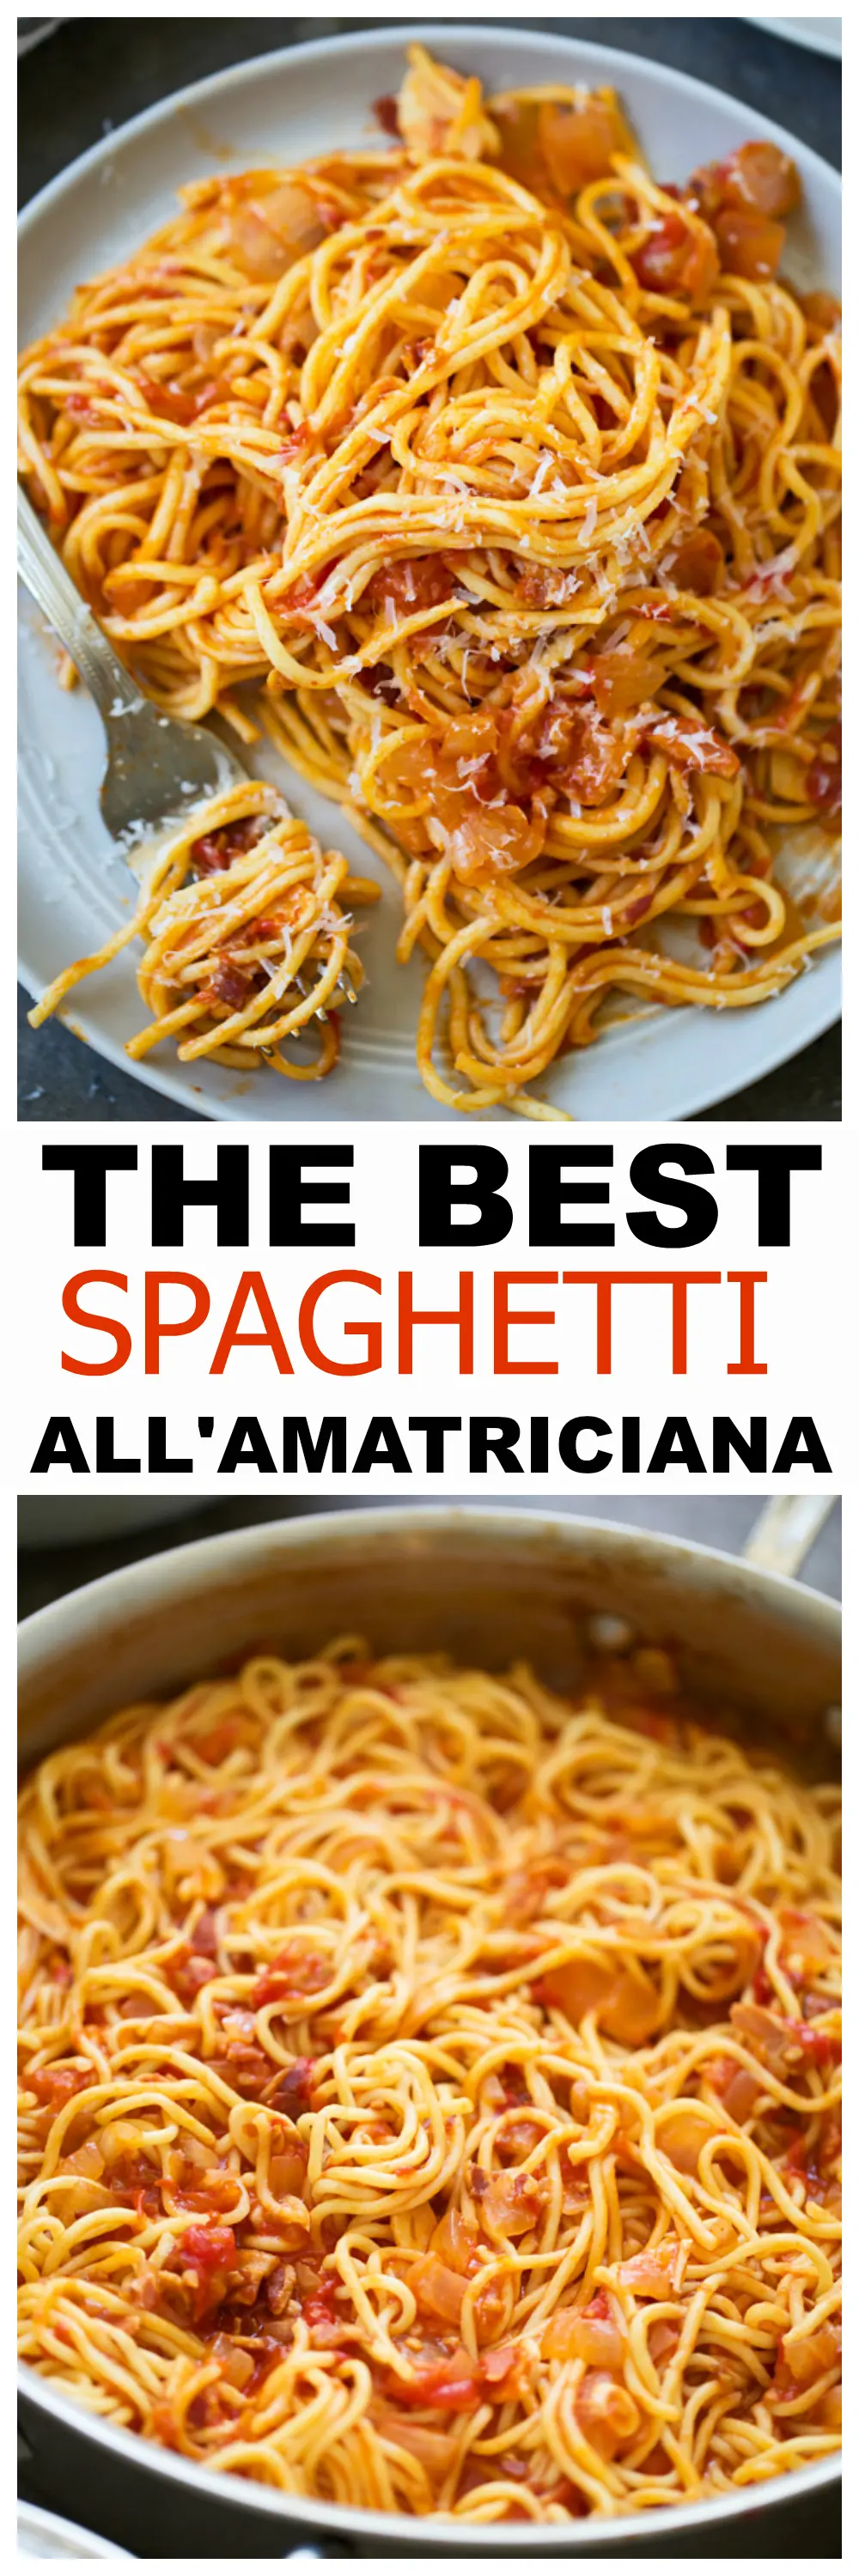 The Best Spaghetti All'Amatriciana made with fresh tomatoes and homemade spaghetti. 